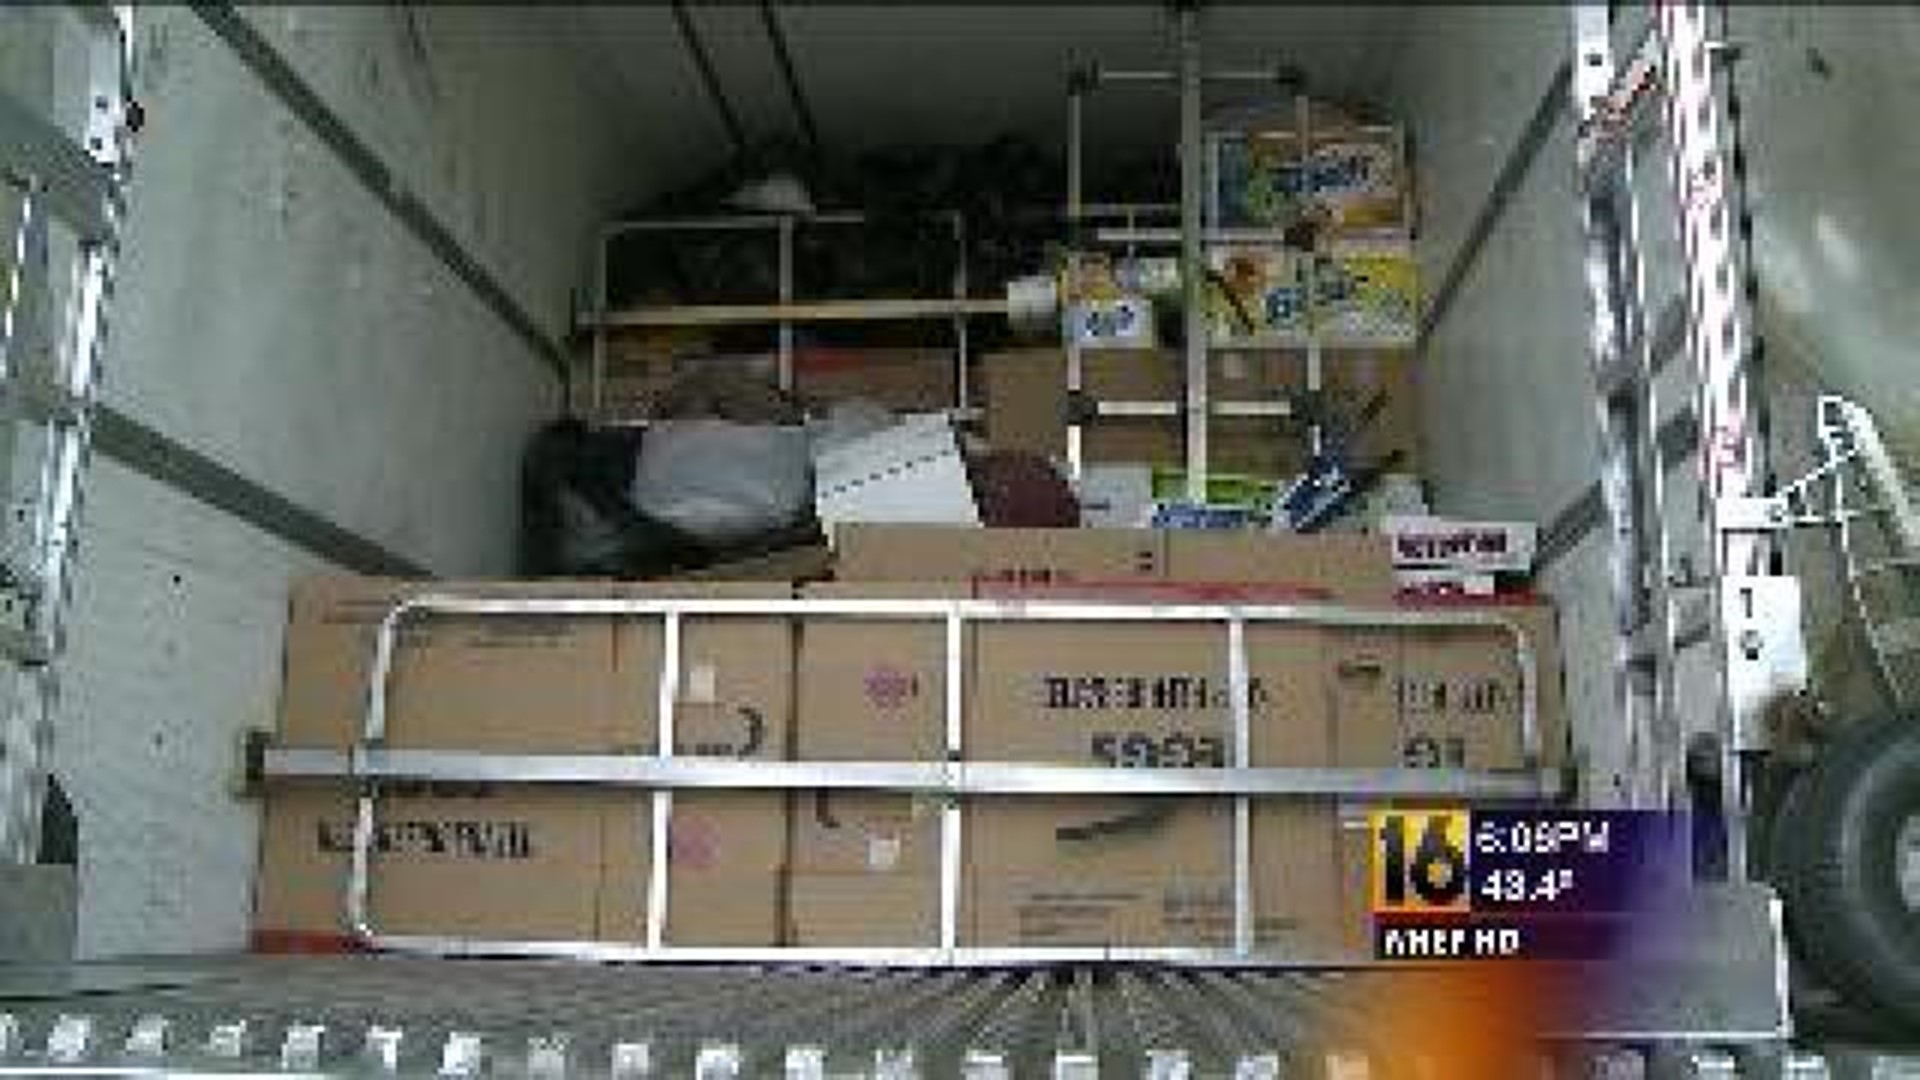 School Helps Victims in Long Island After Sandy